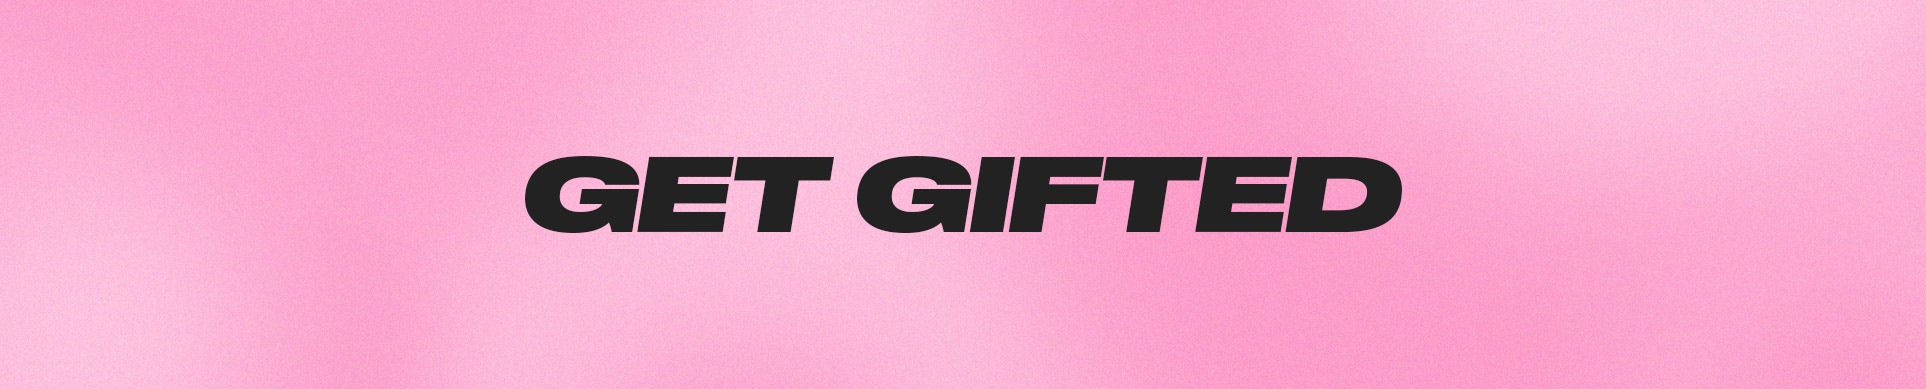 Get Gifted Banner